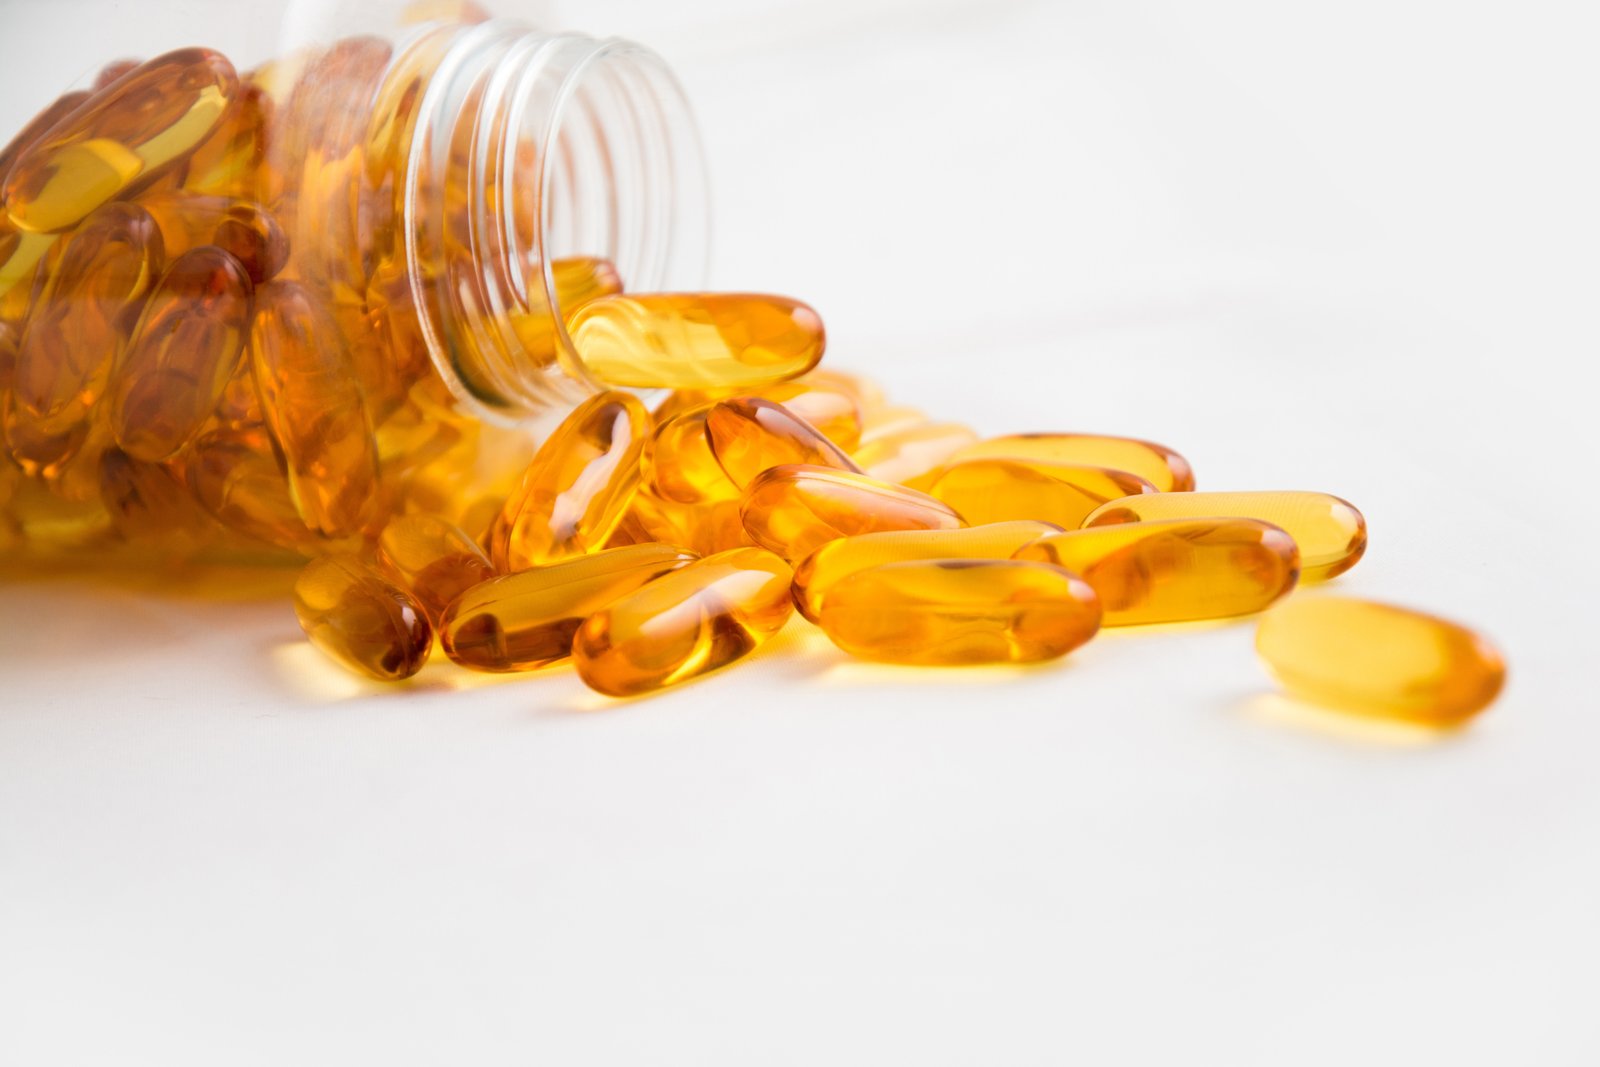 #DoesItWorkSummary: Omega-3 Fatty Acids Supplementation for the Prevention of Cardiovascular Disease